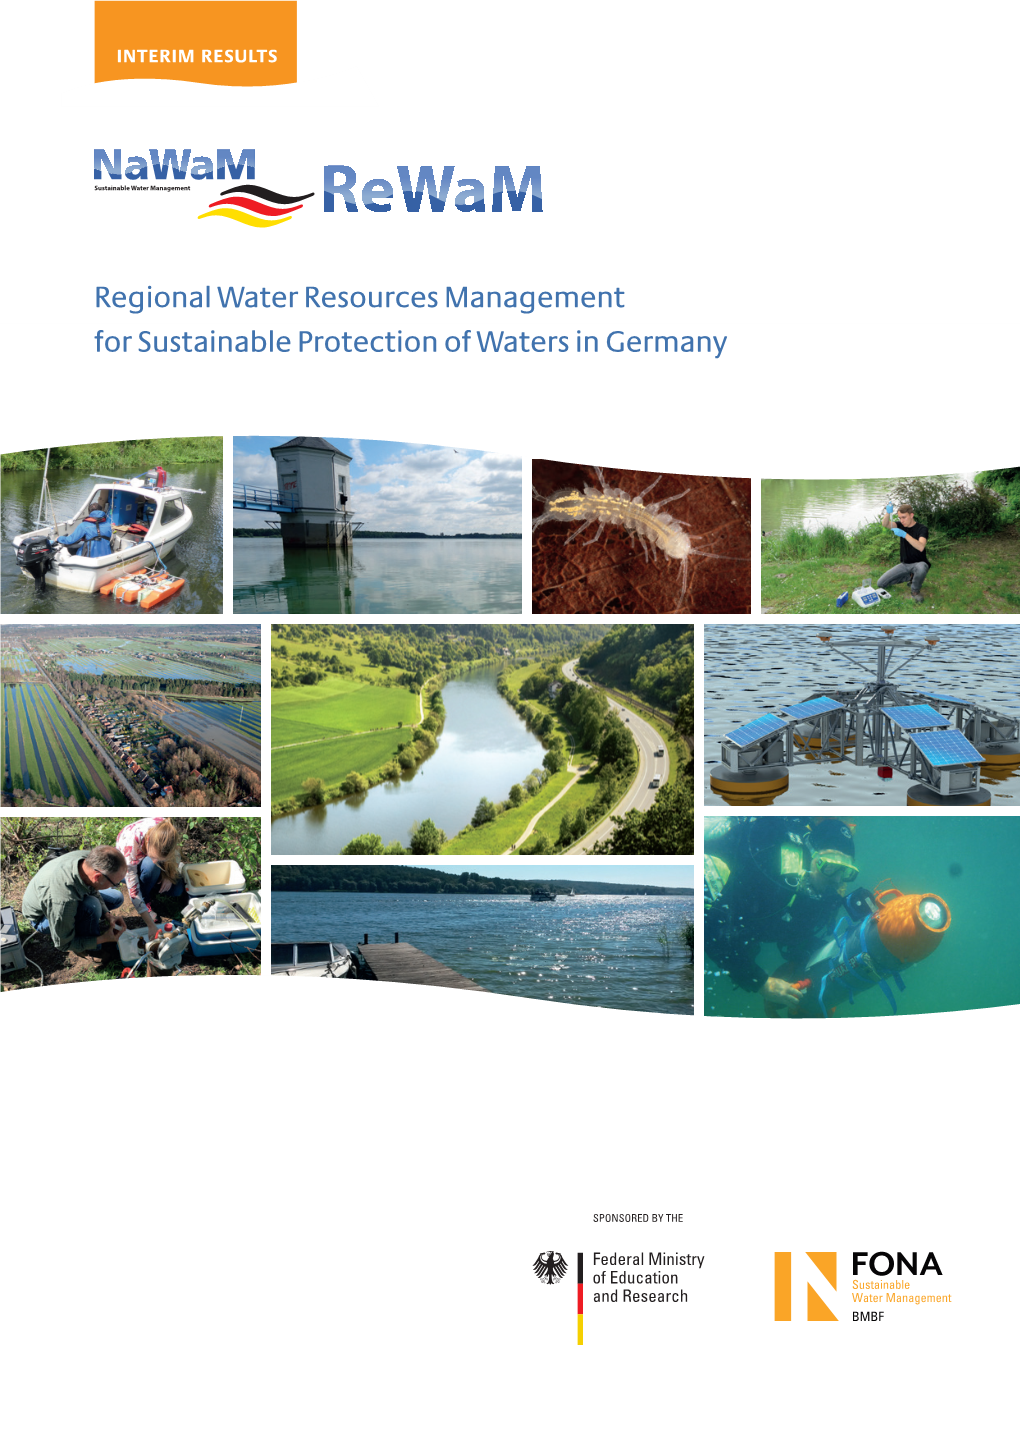 Regional Water Resources Management for Sustainable Protection of Waters in Germany